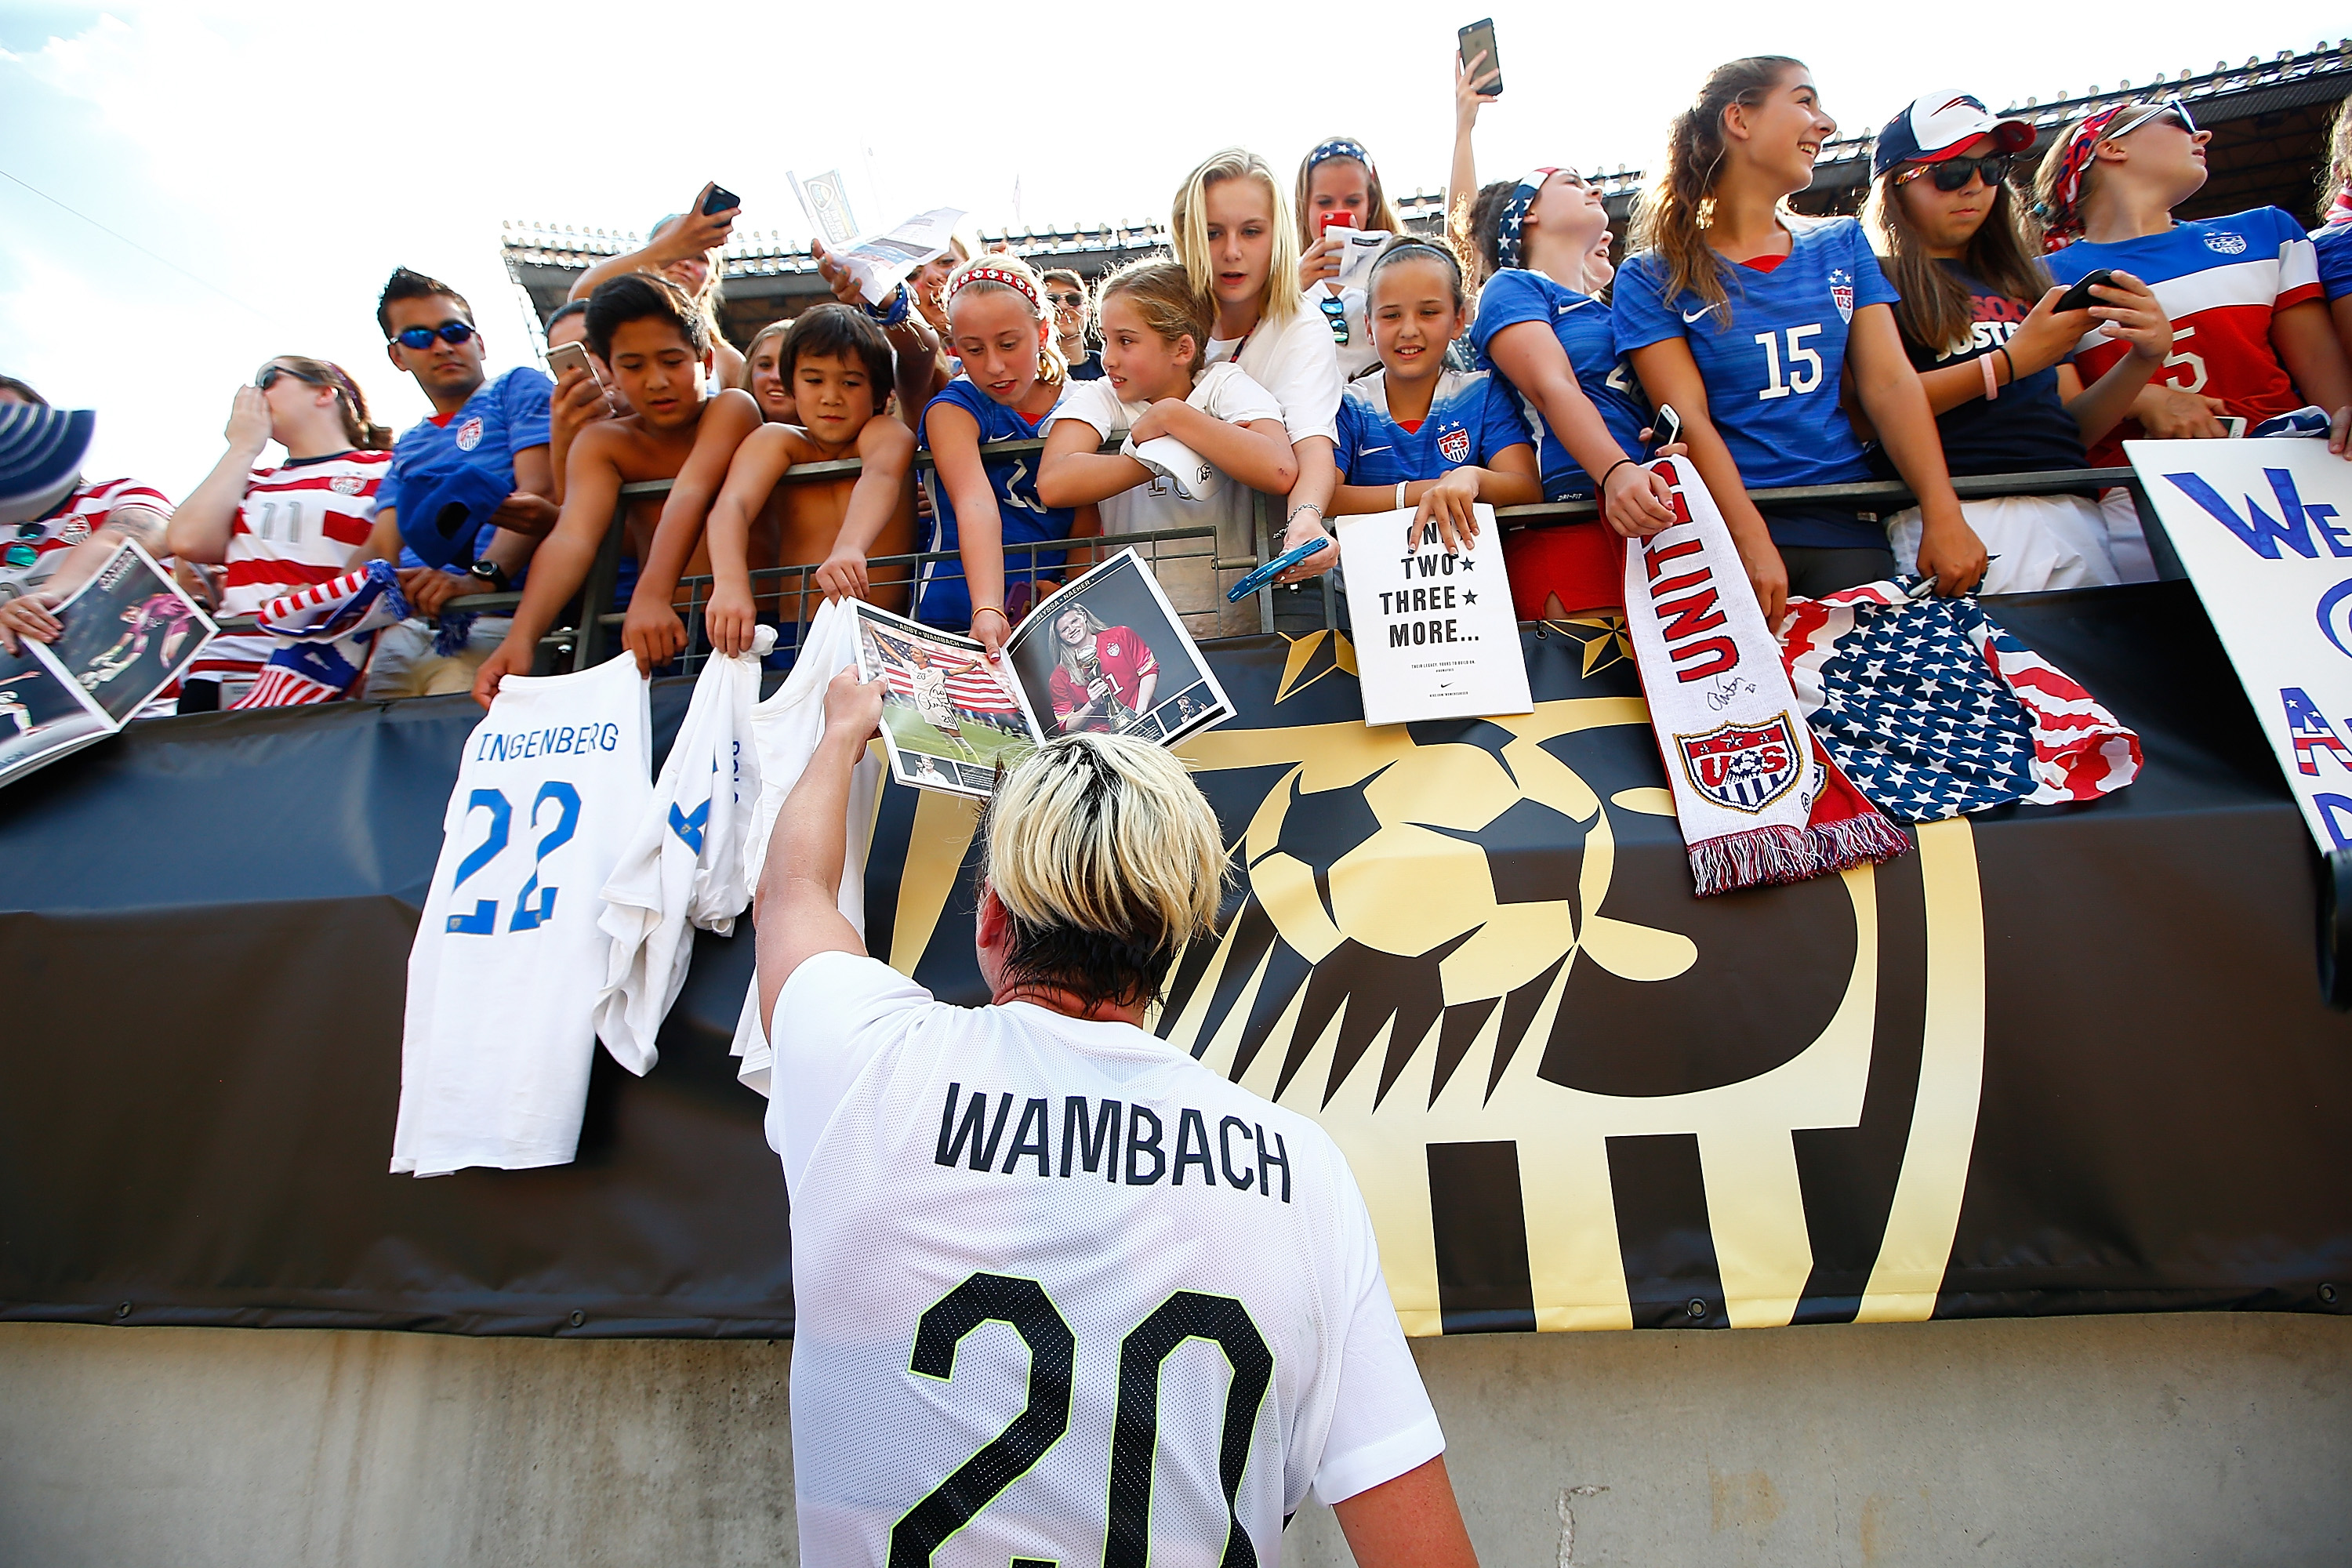 Abby Wambach’s legacy is much more than just being a soccer player